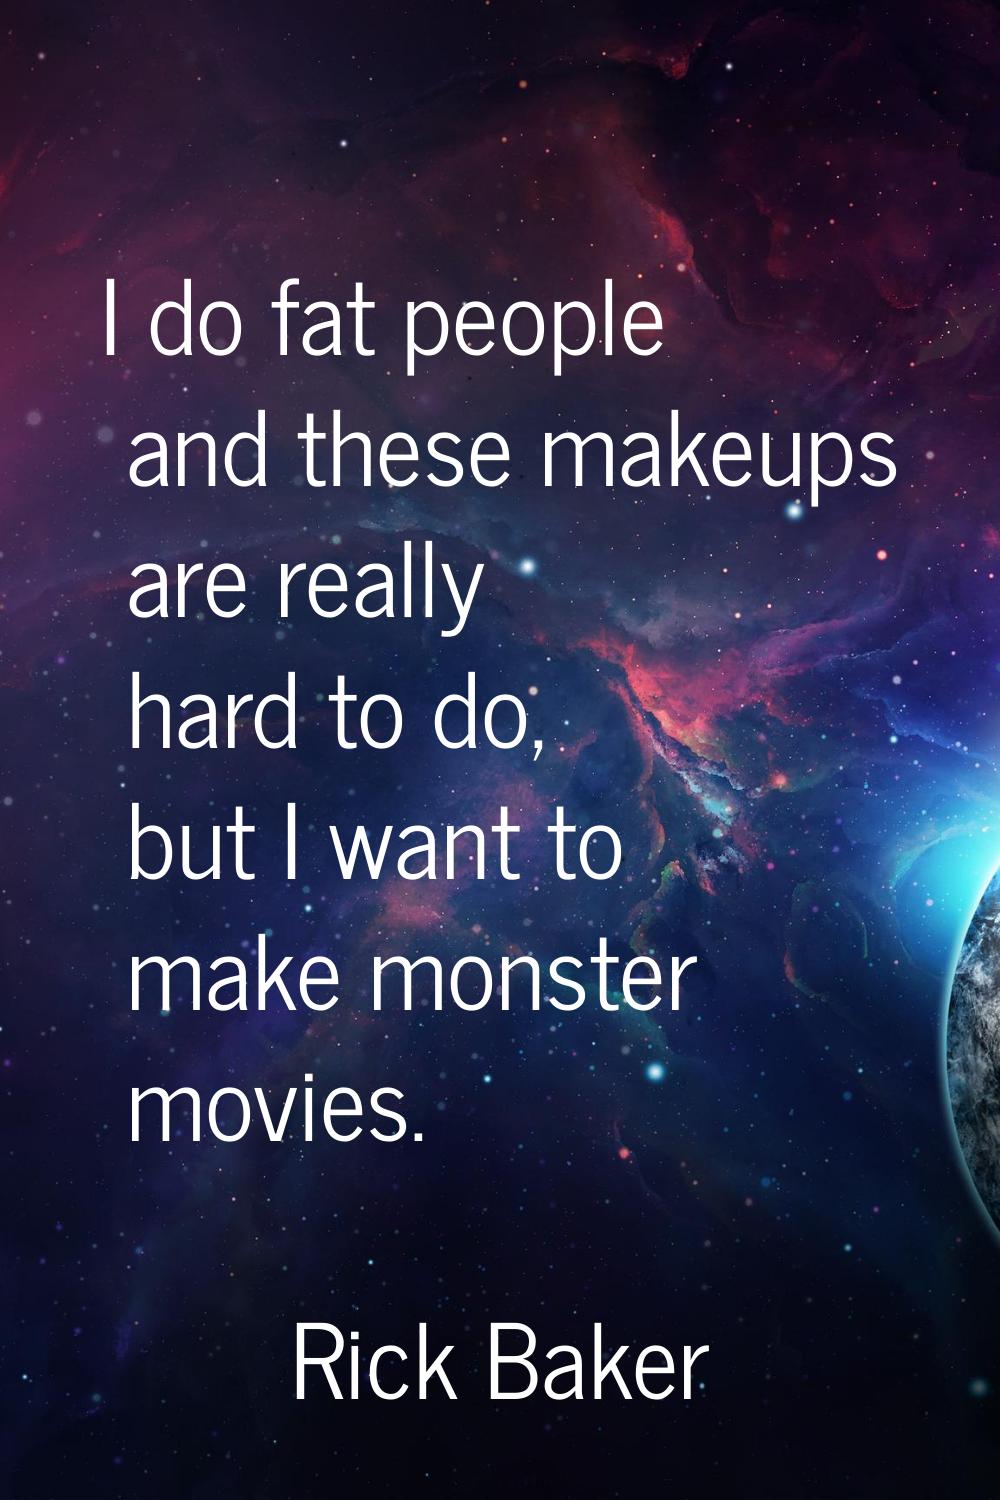 I do fat people and these makeups are really hard to do, but I want to make monster movies.